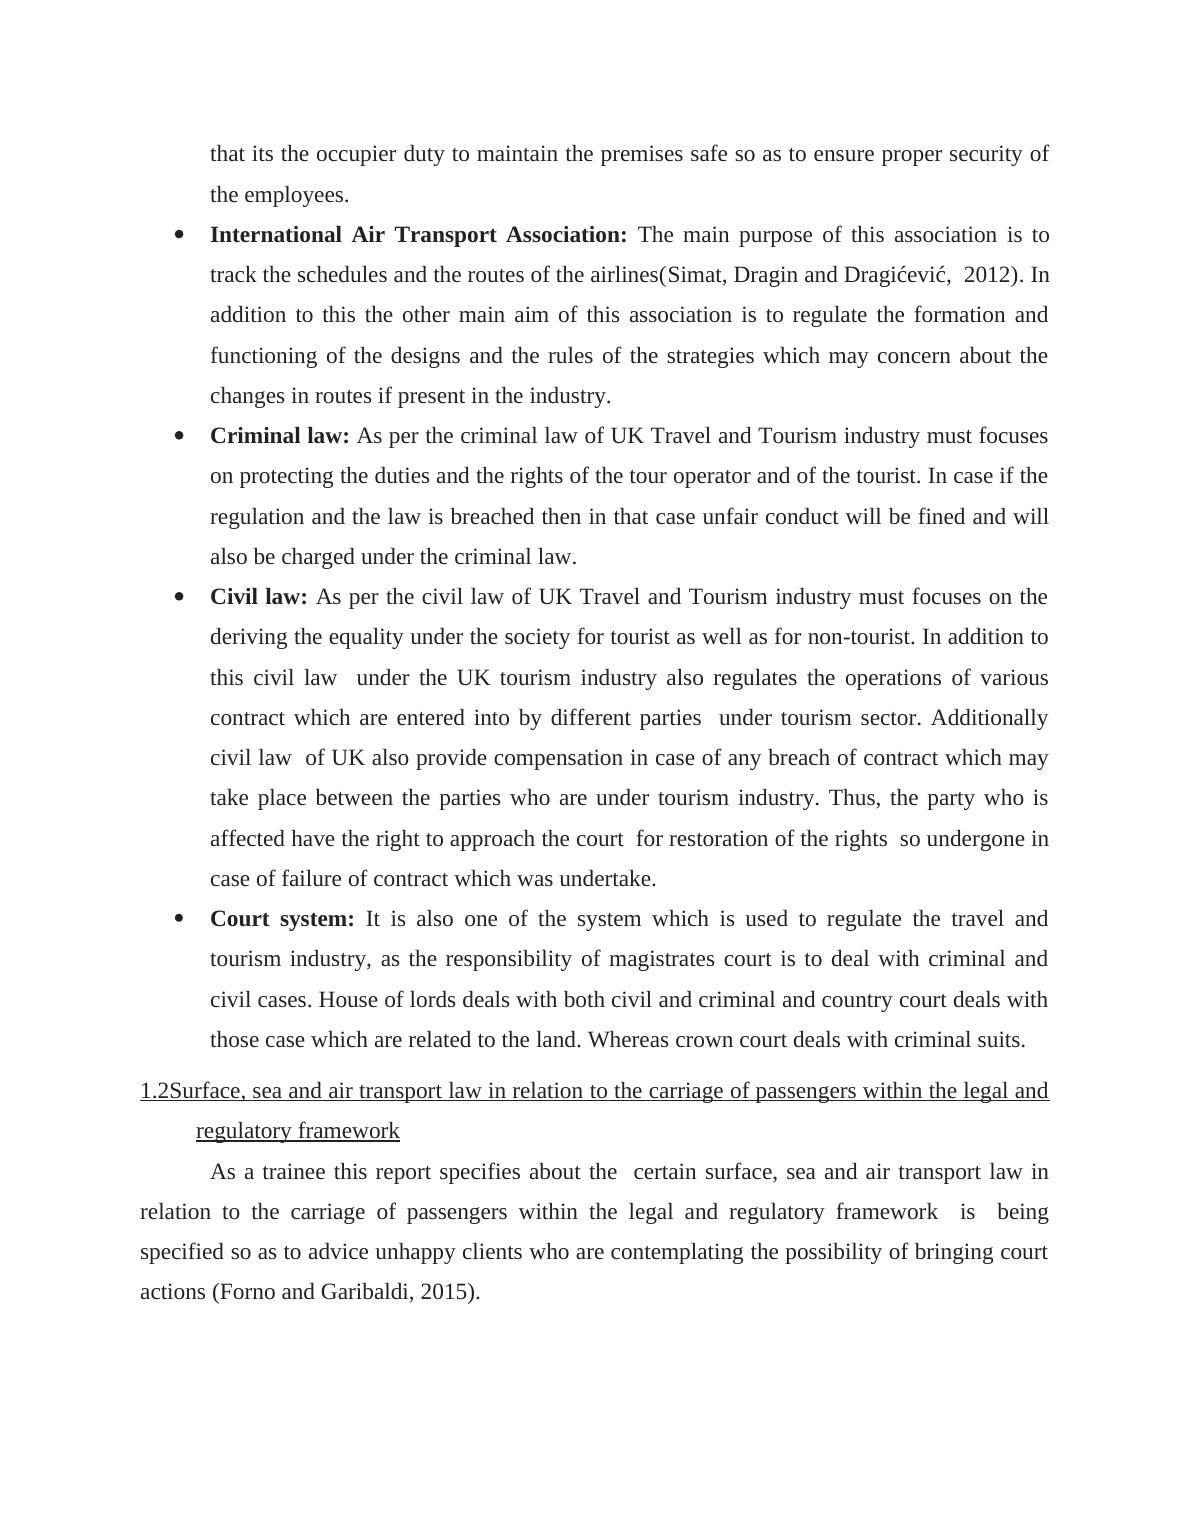 Legislation and Ethics in the Travel and Tourism Sector (docs)_4